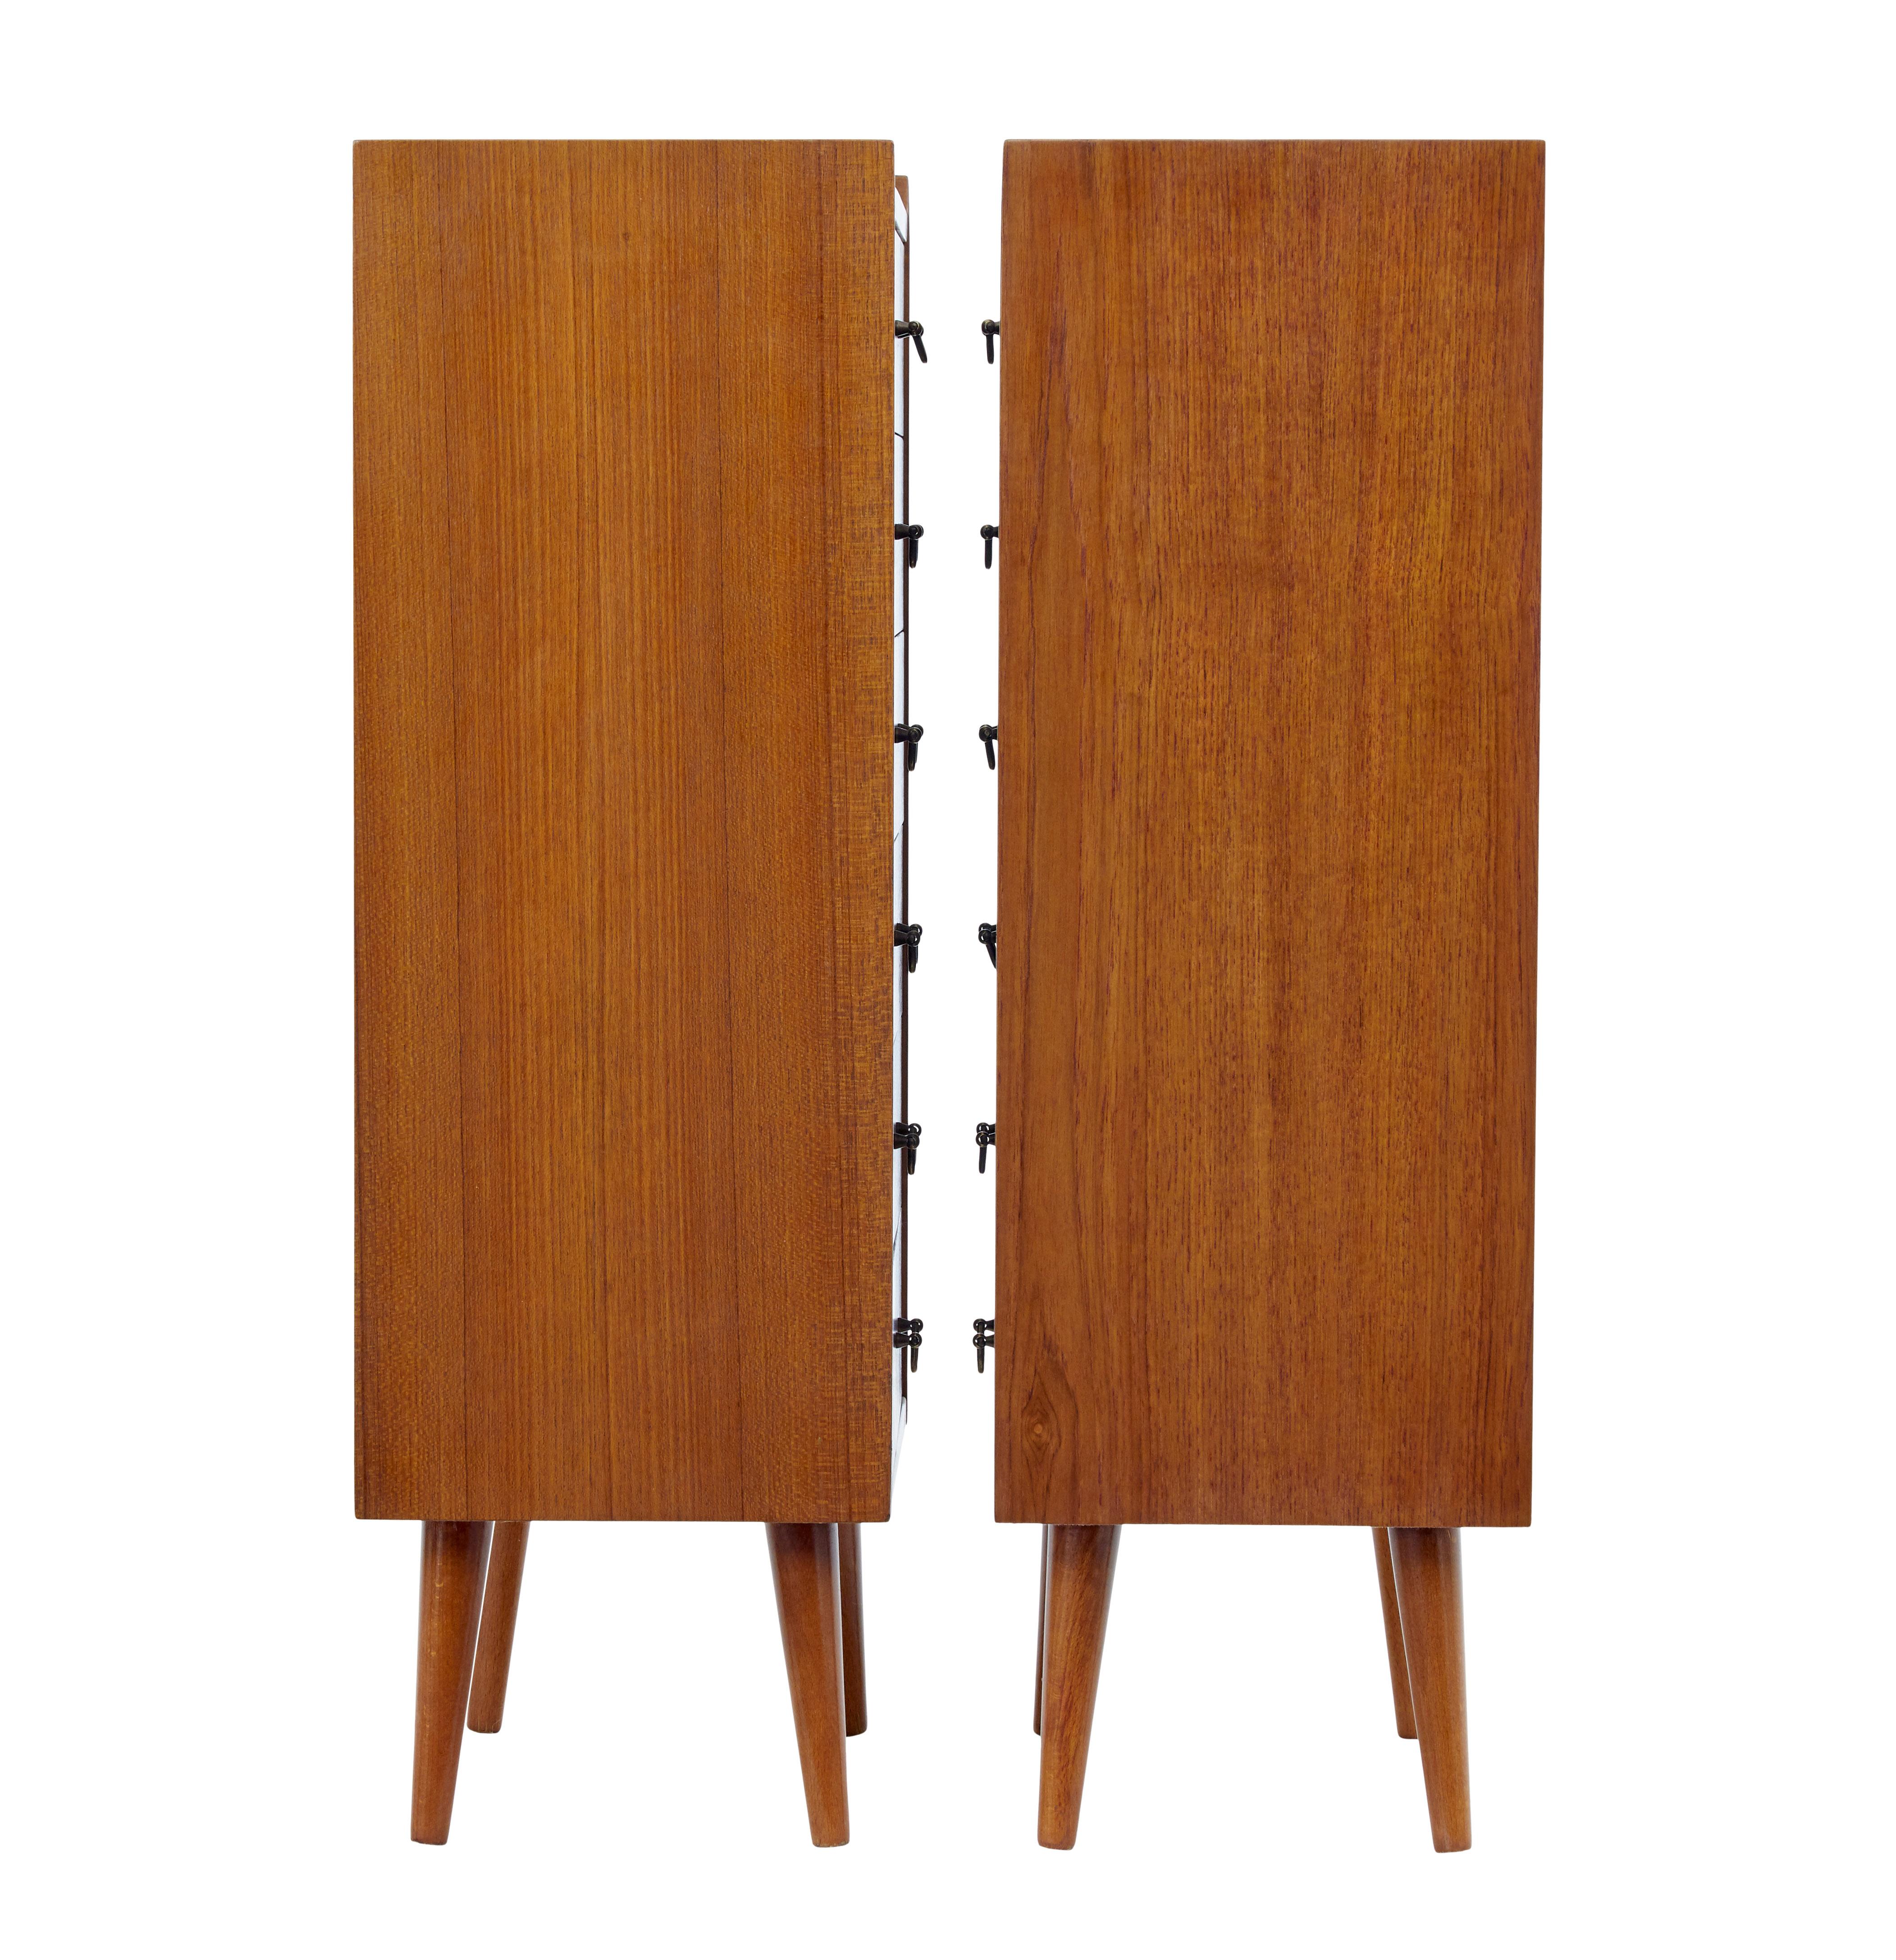 Hand-Crafted Pair of Mid-20th Century Scandinavian Teak Chest of Drawers For Sale